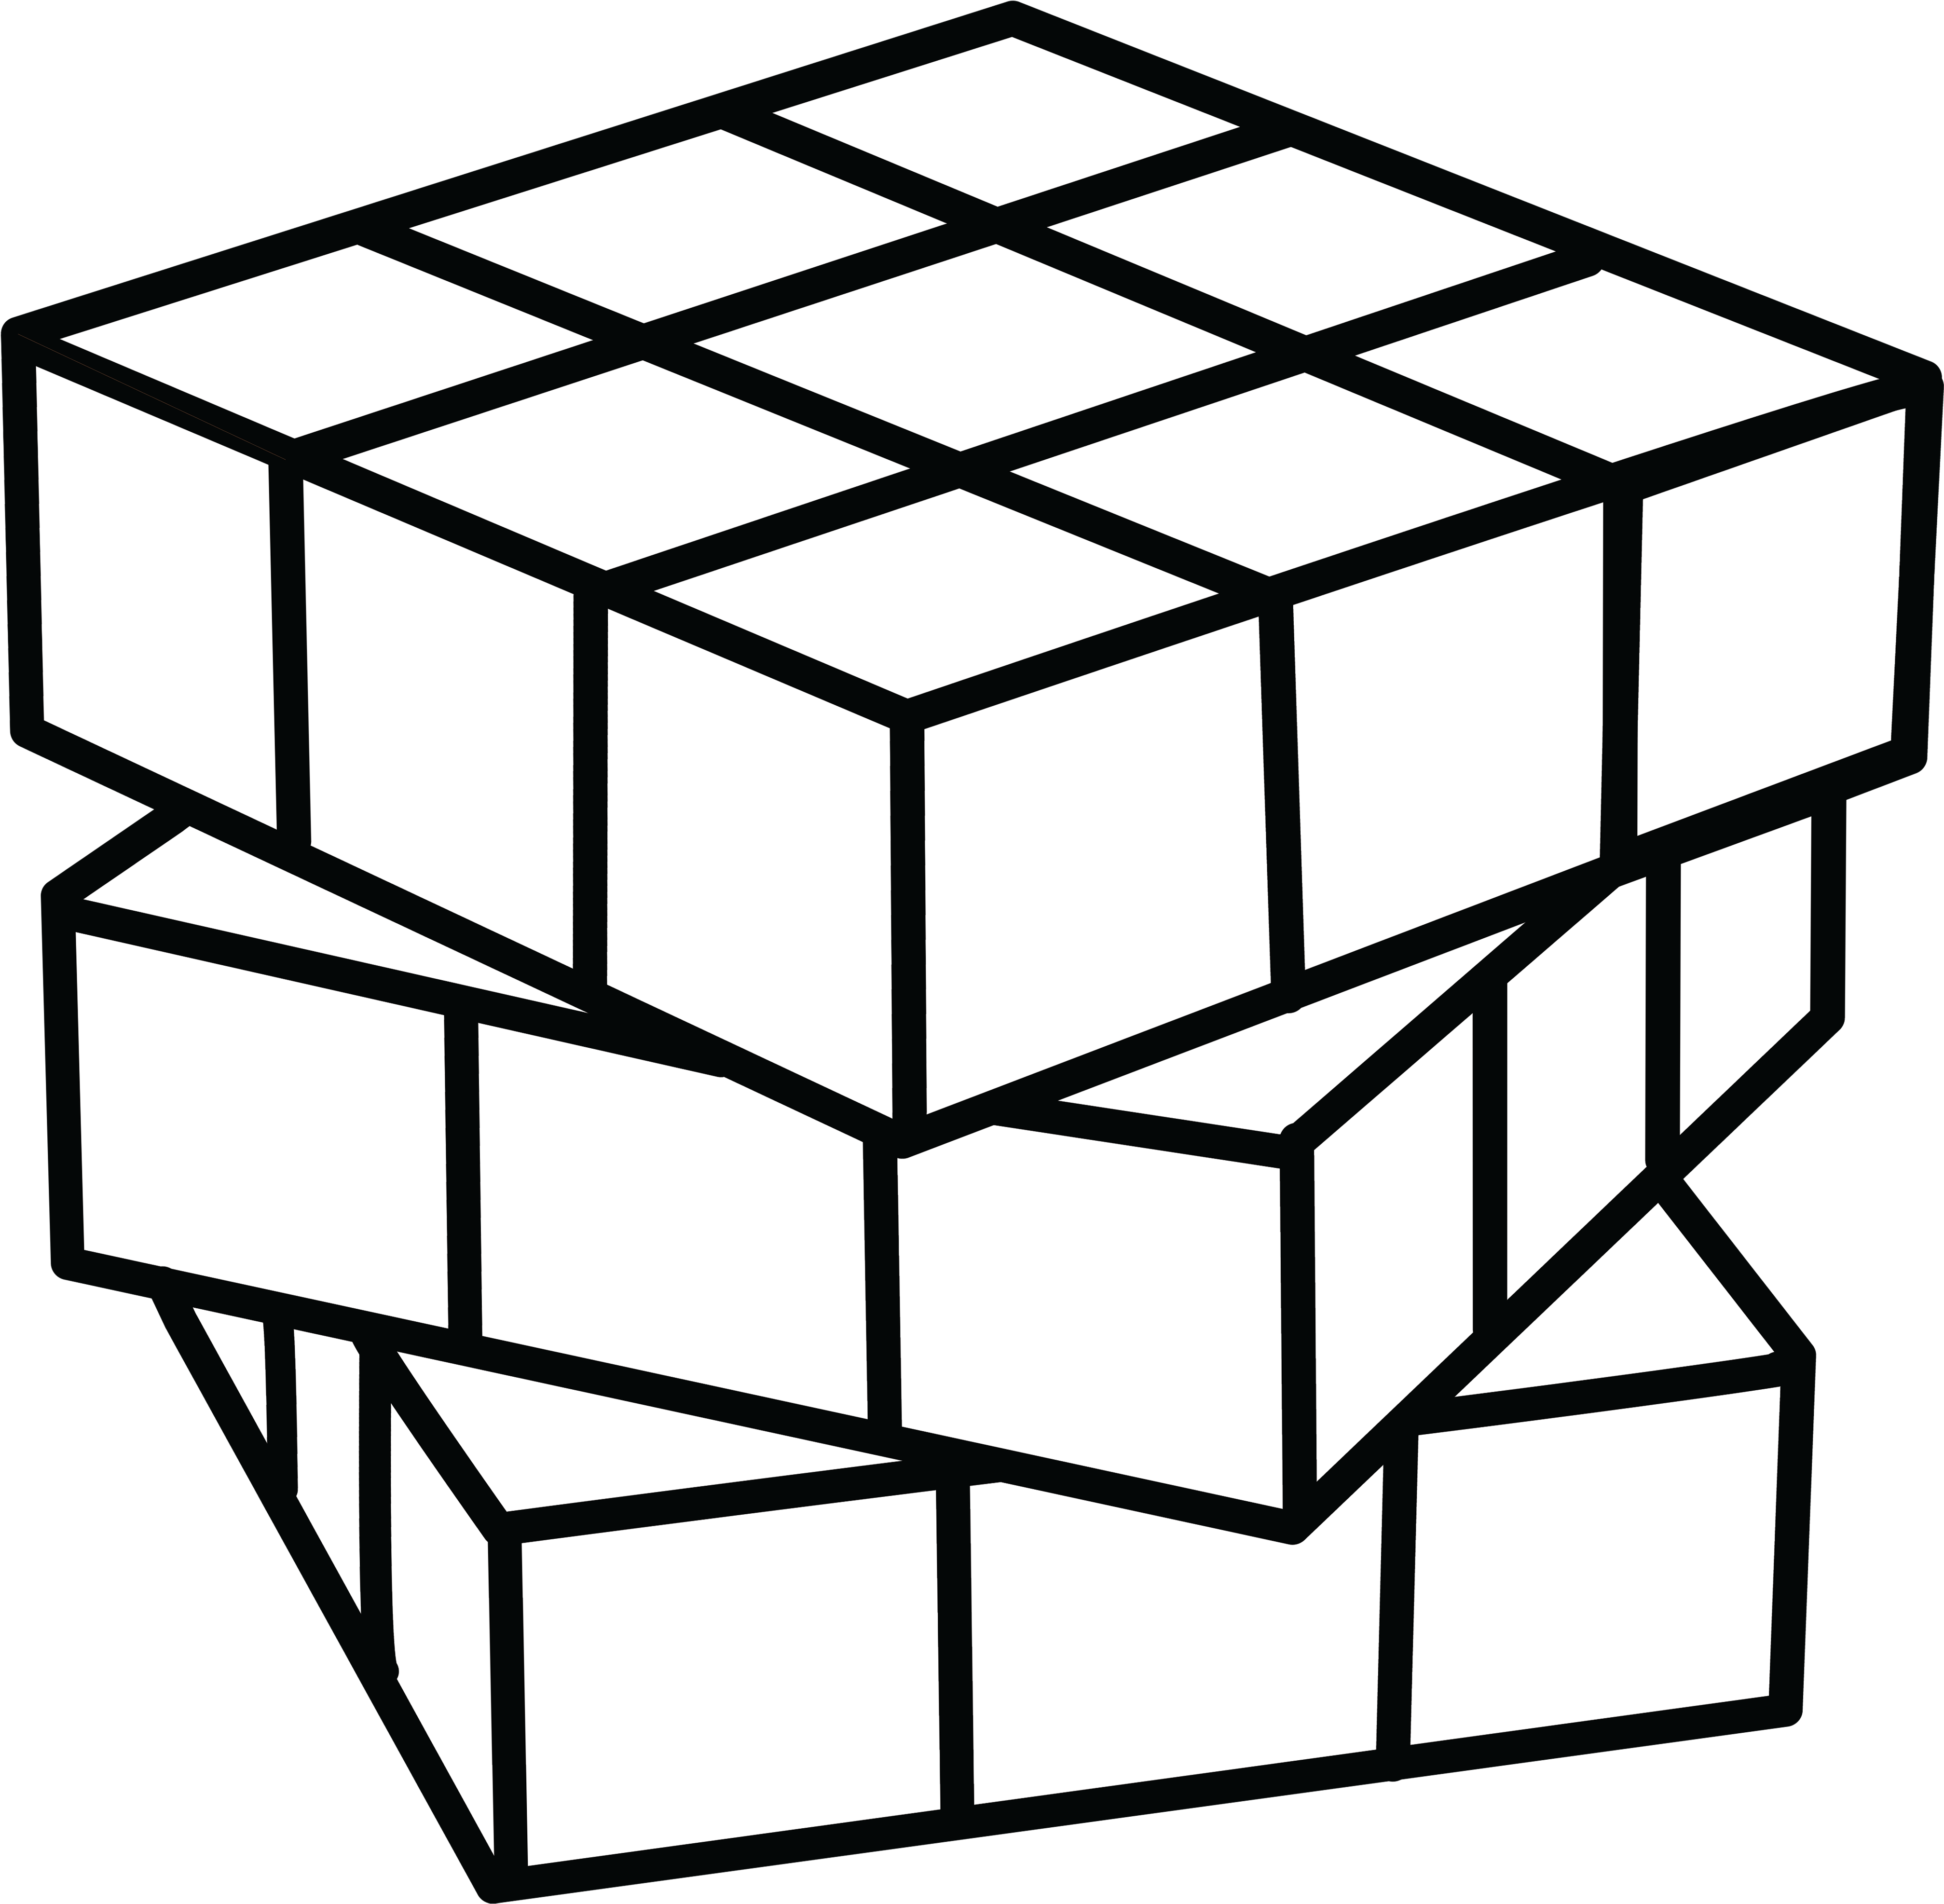 Download Cube Clipart Coloring Page - Rubix Cube Coloring Pages PNG Image  with No Background - PNGkey.com